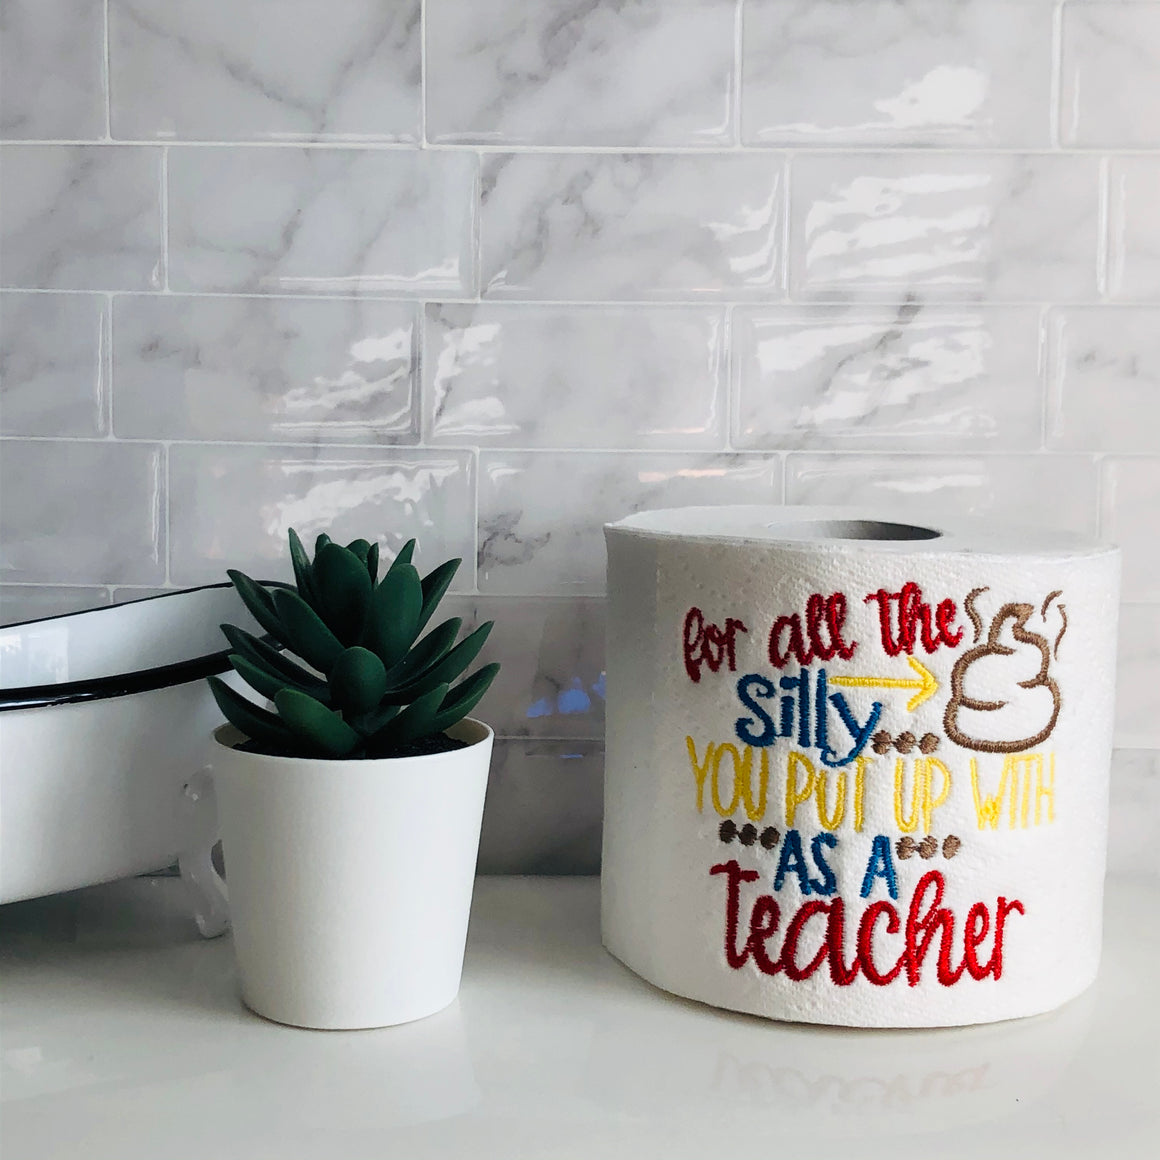 Funny End of Year School Gifts for Teacher